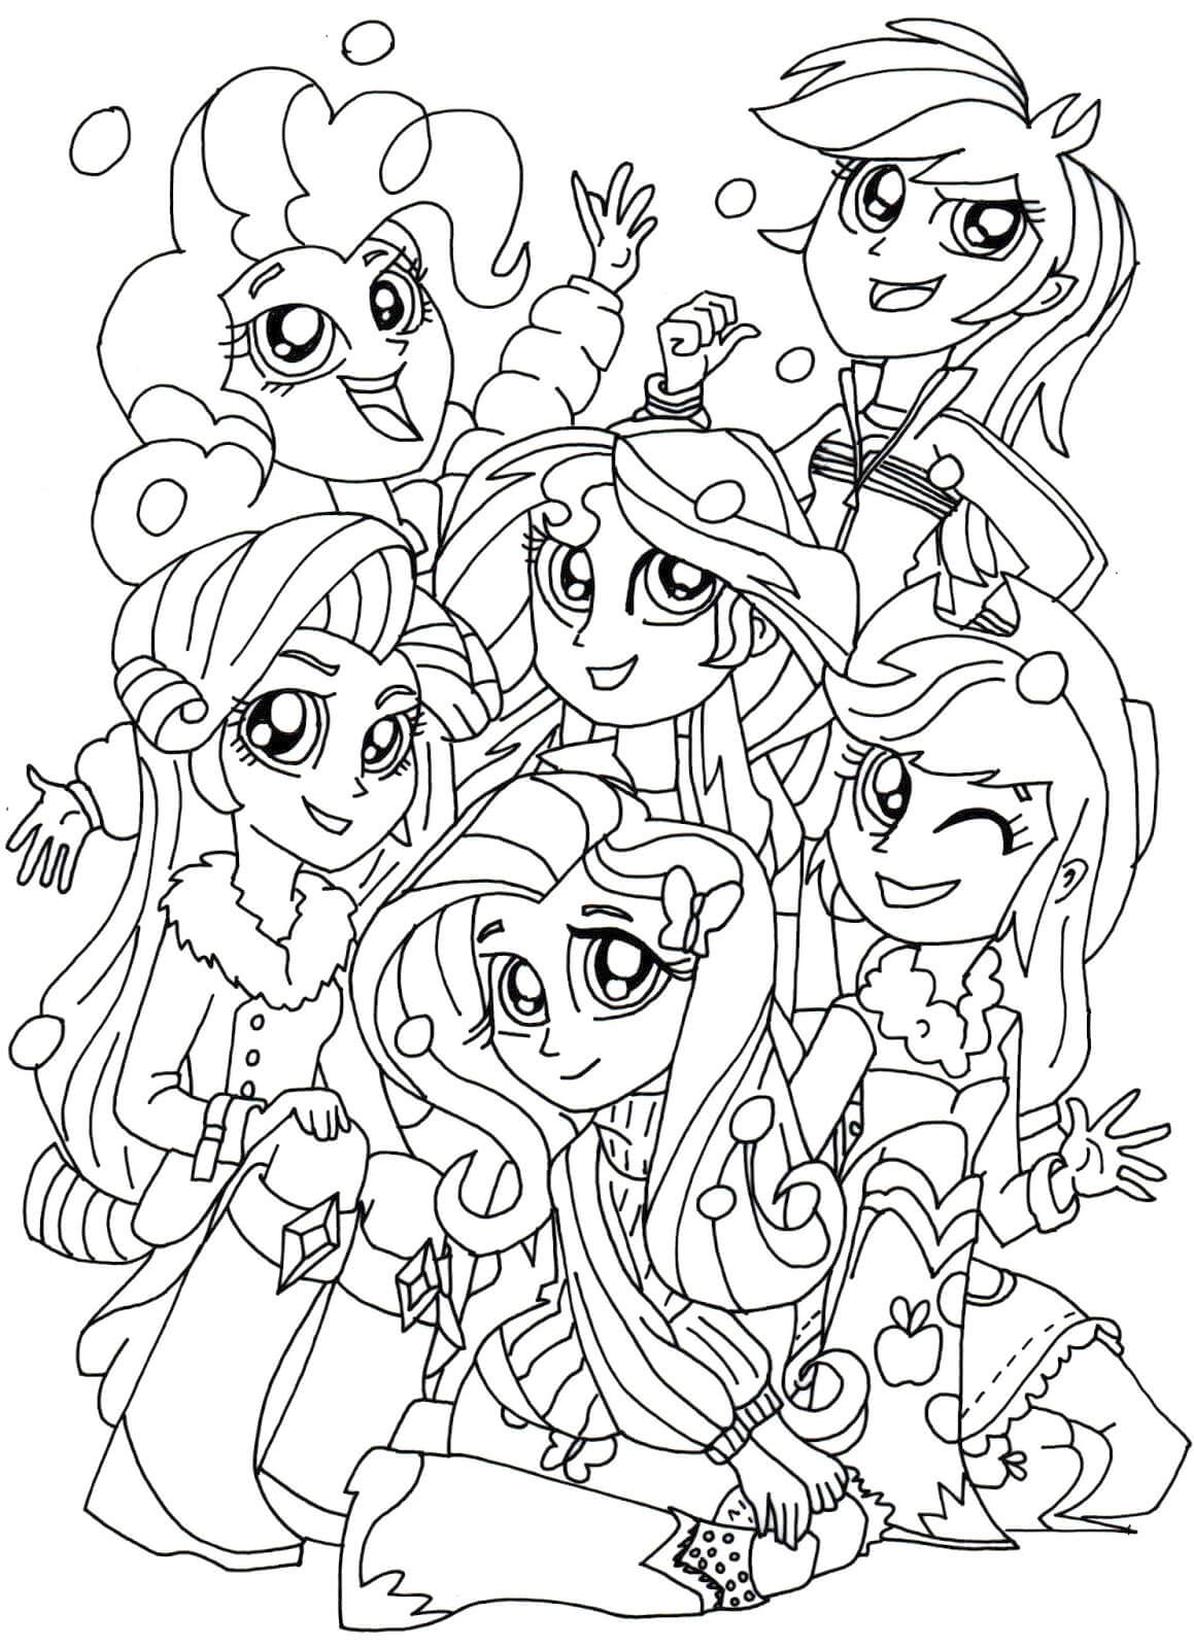 20+ Free Printable Equestria Girls Coloring Pages ...